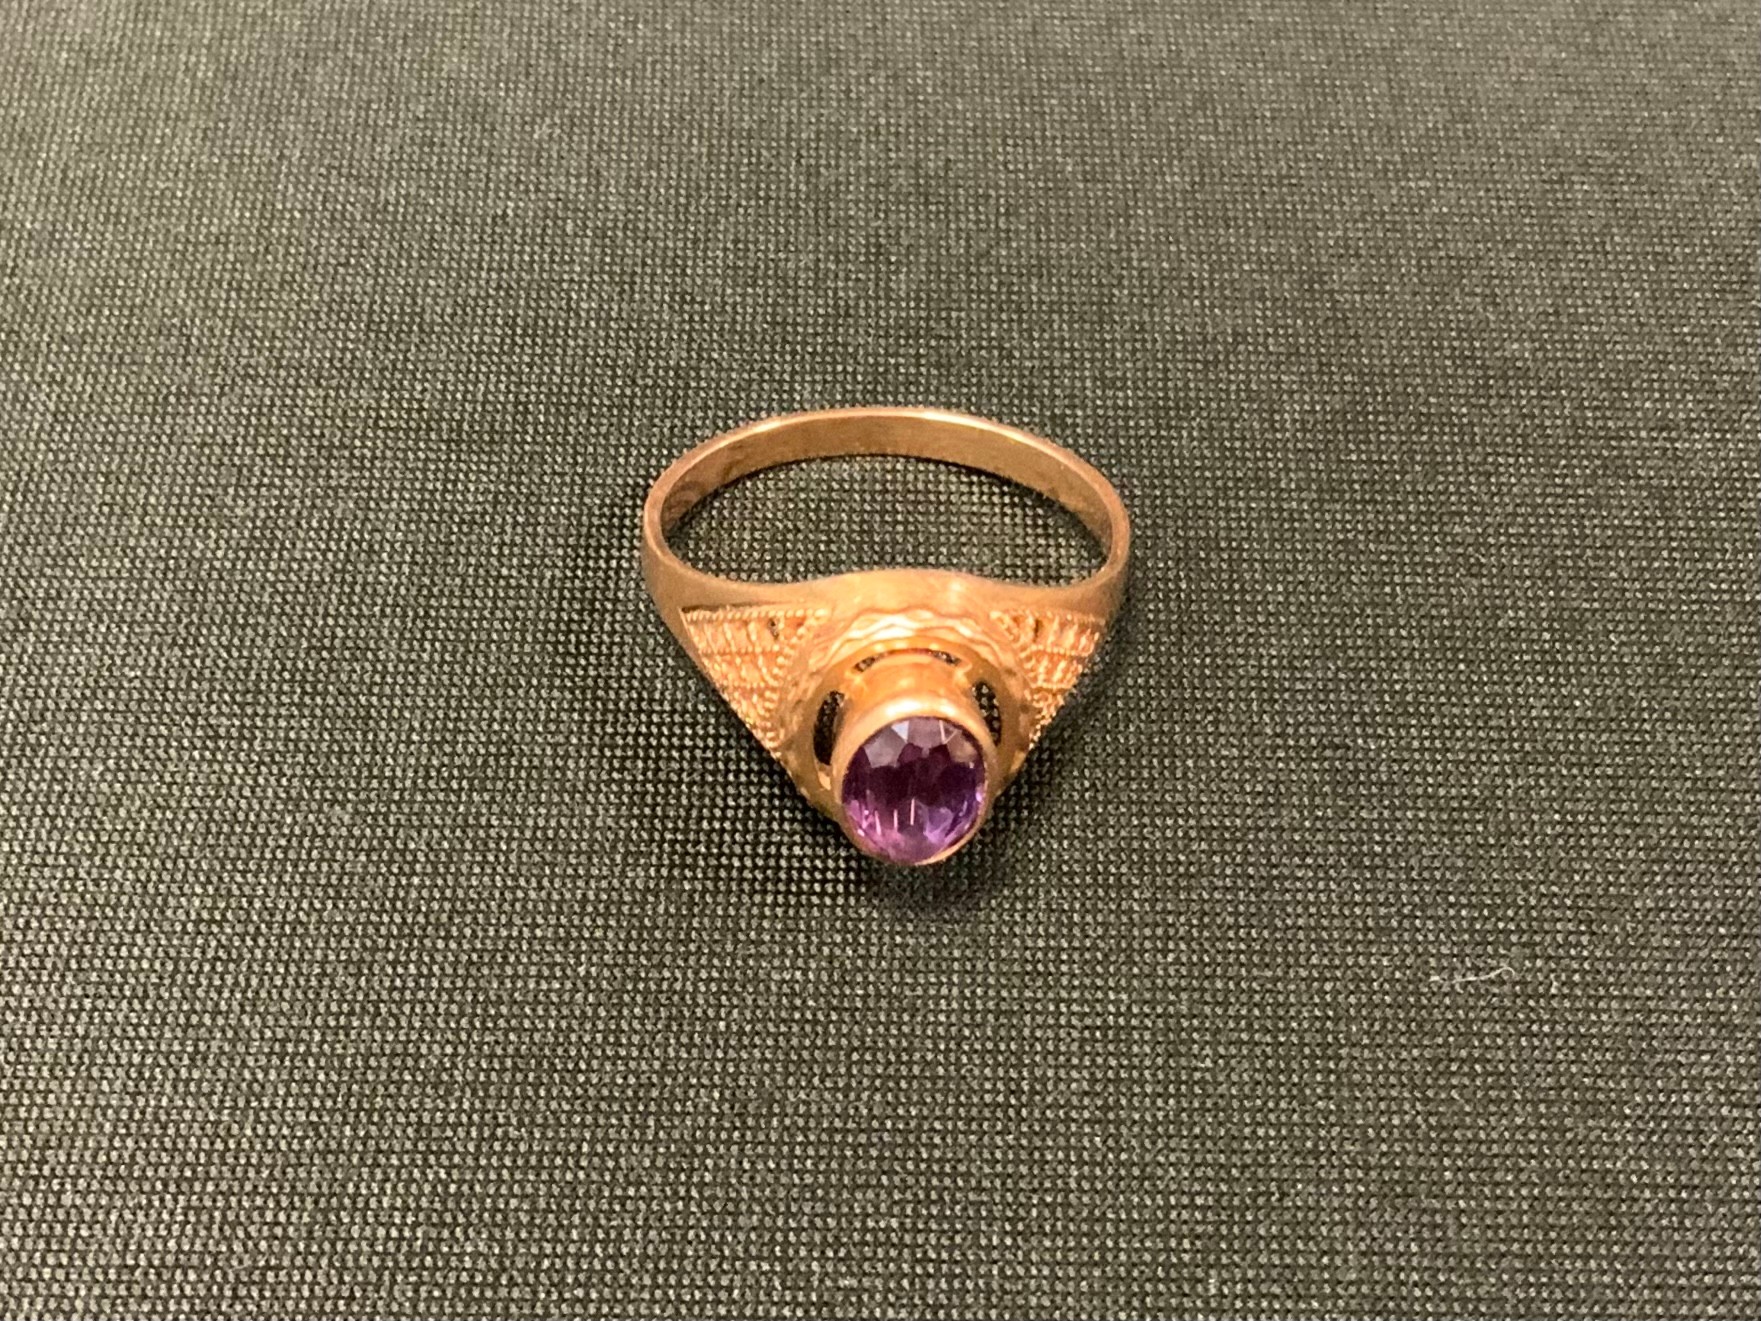 A Russian 14ct gold pale pink amethyst dress ring, lattice shoulders, stamped 585, size P/Q, 3.7 g